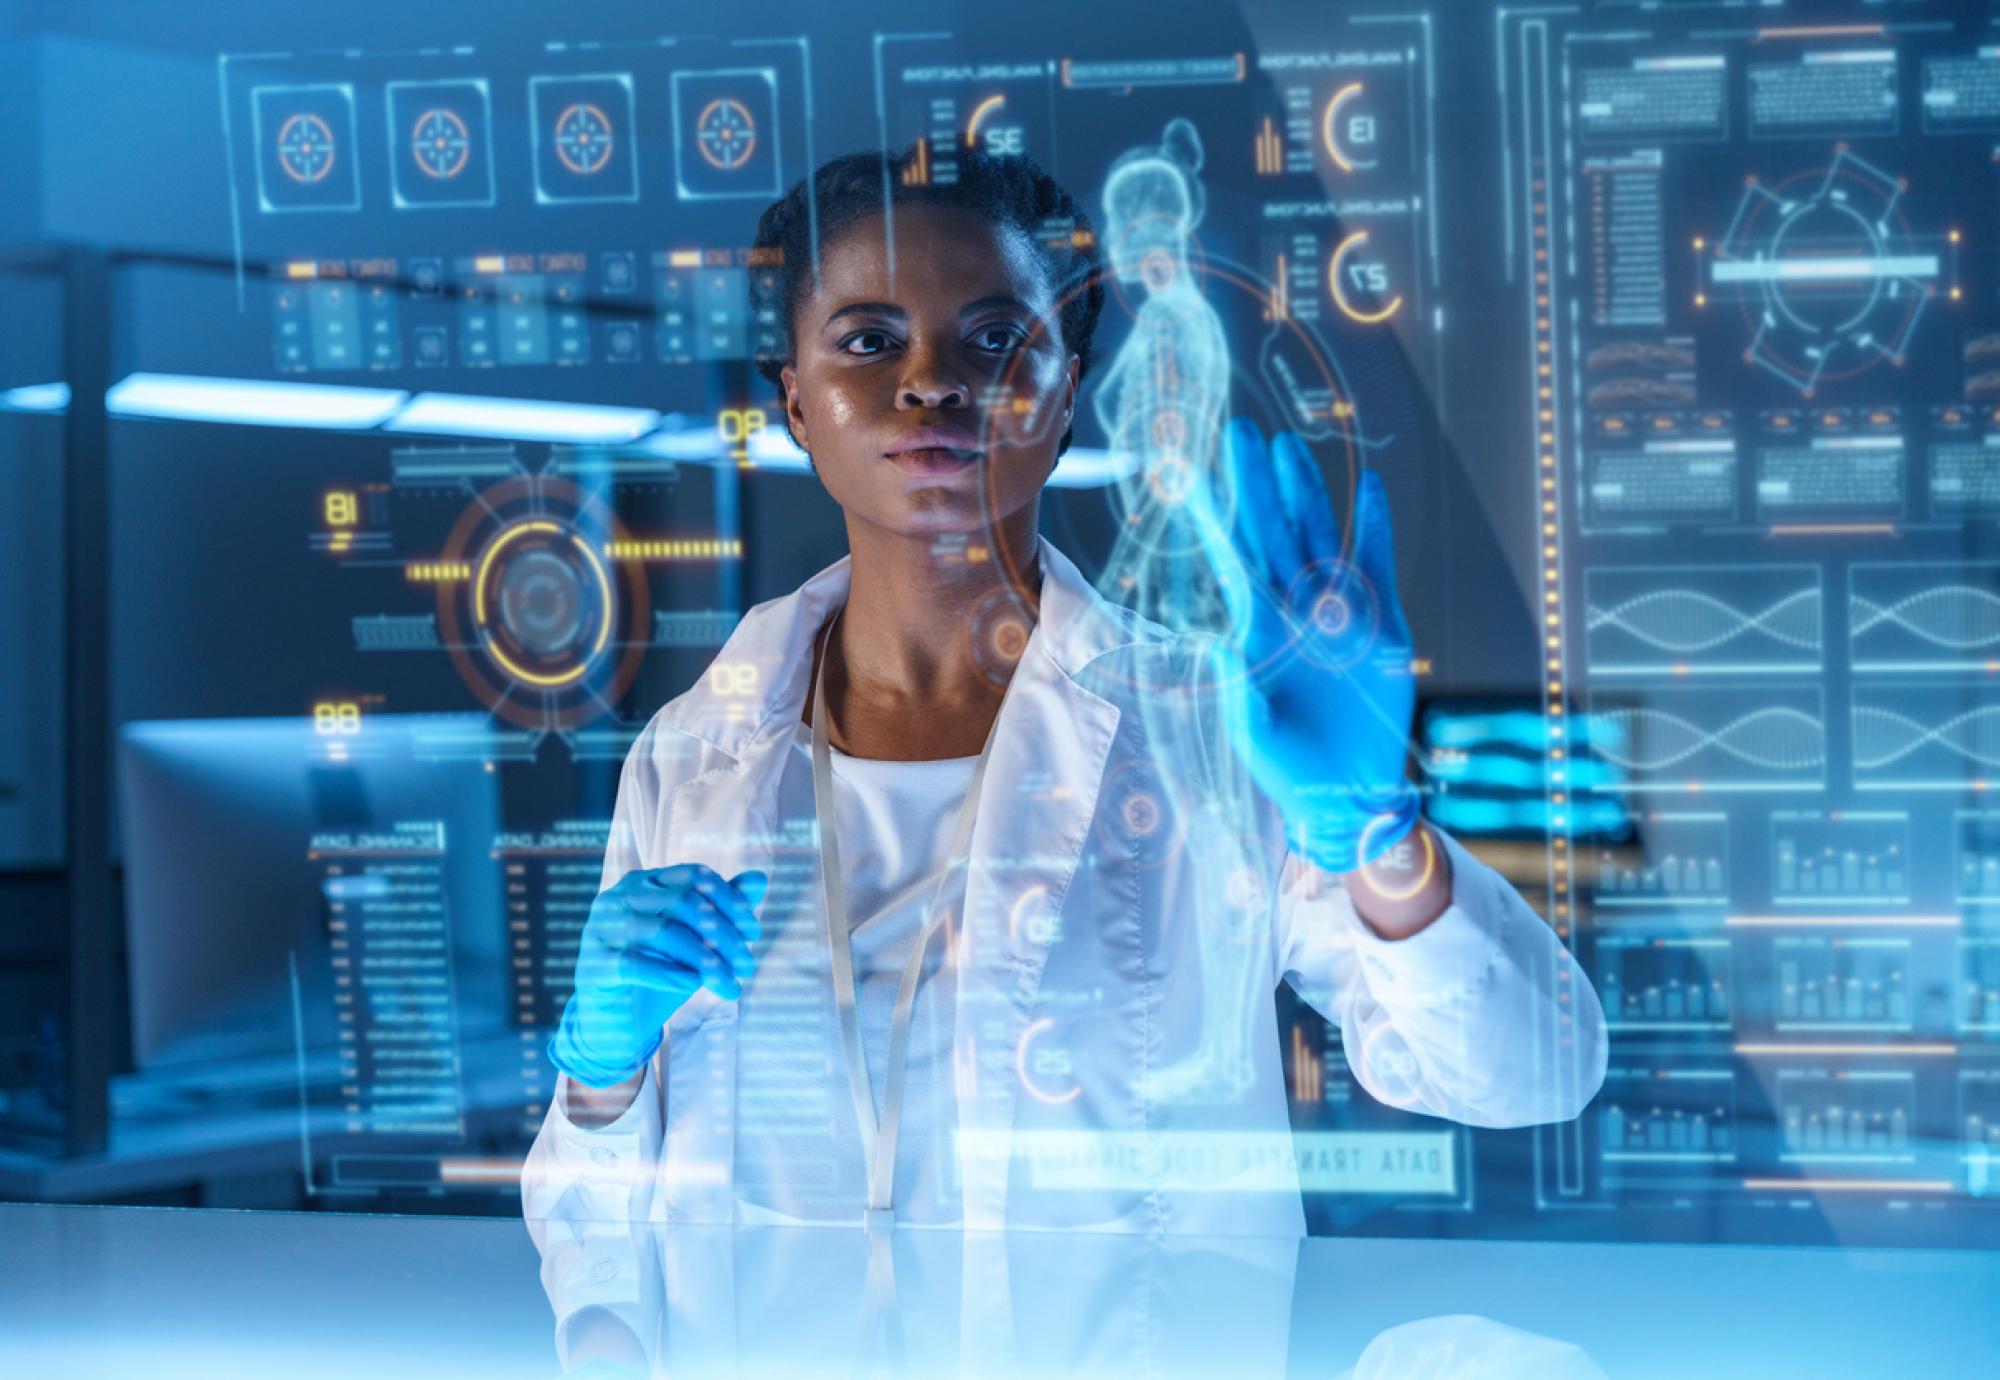 Image of health professional using a digital interface depicting the AI accelerator fund